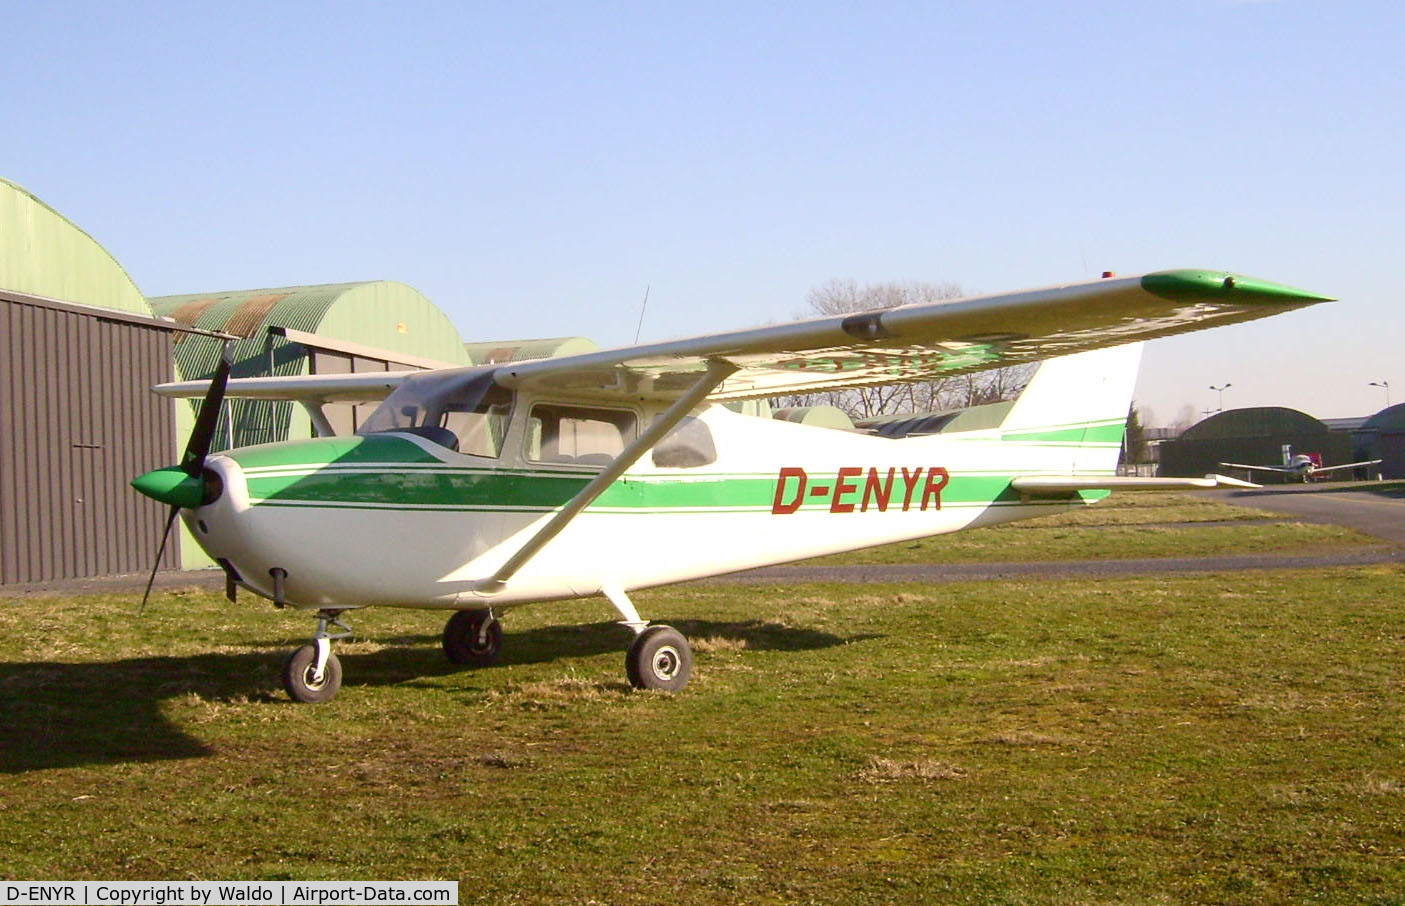 D-ENYR, 1962 Cessna 172C C/N 49253, Old Cessna 172C being made operational again